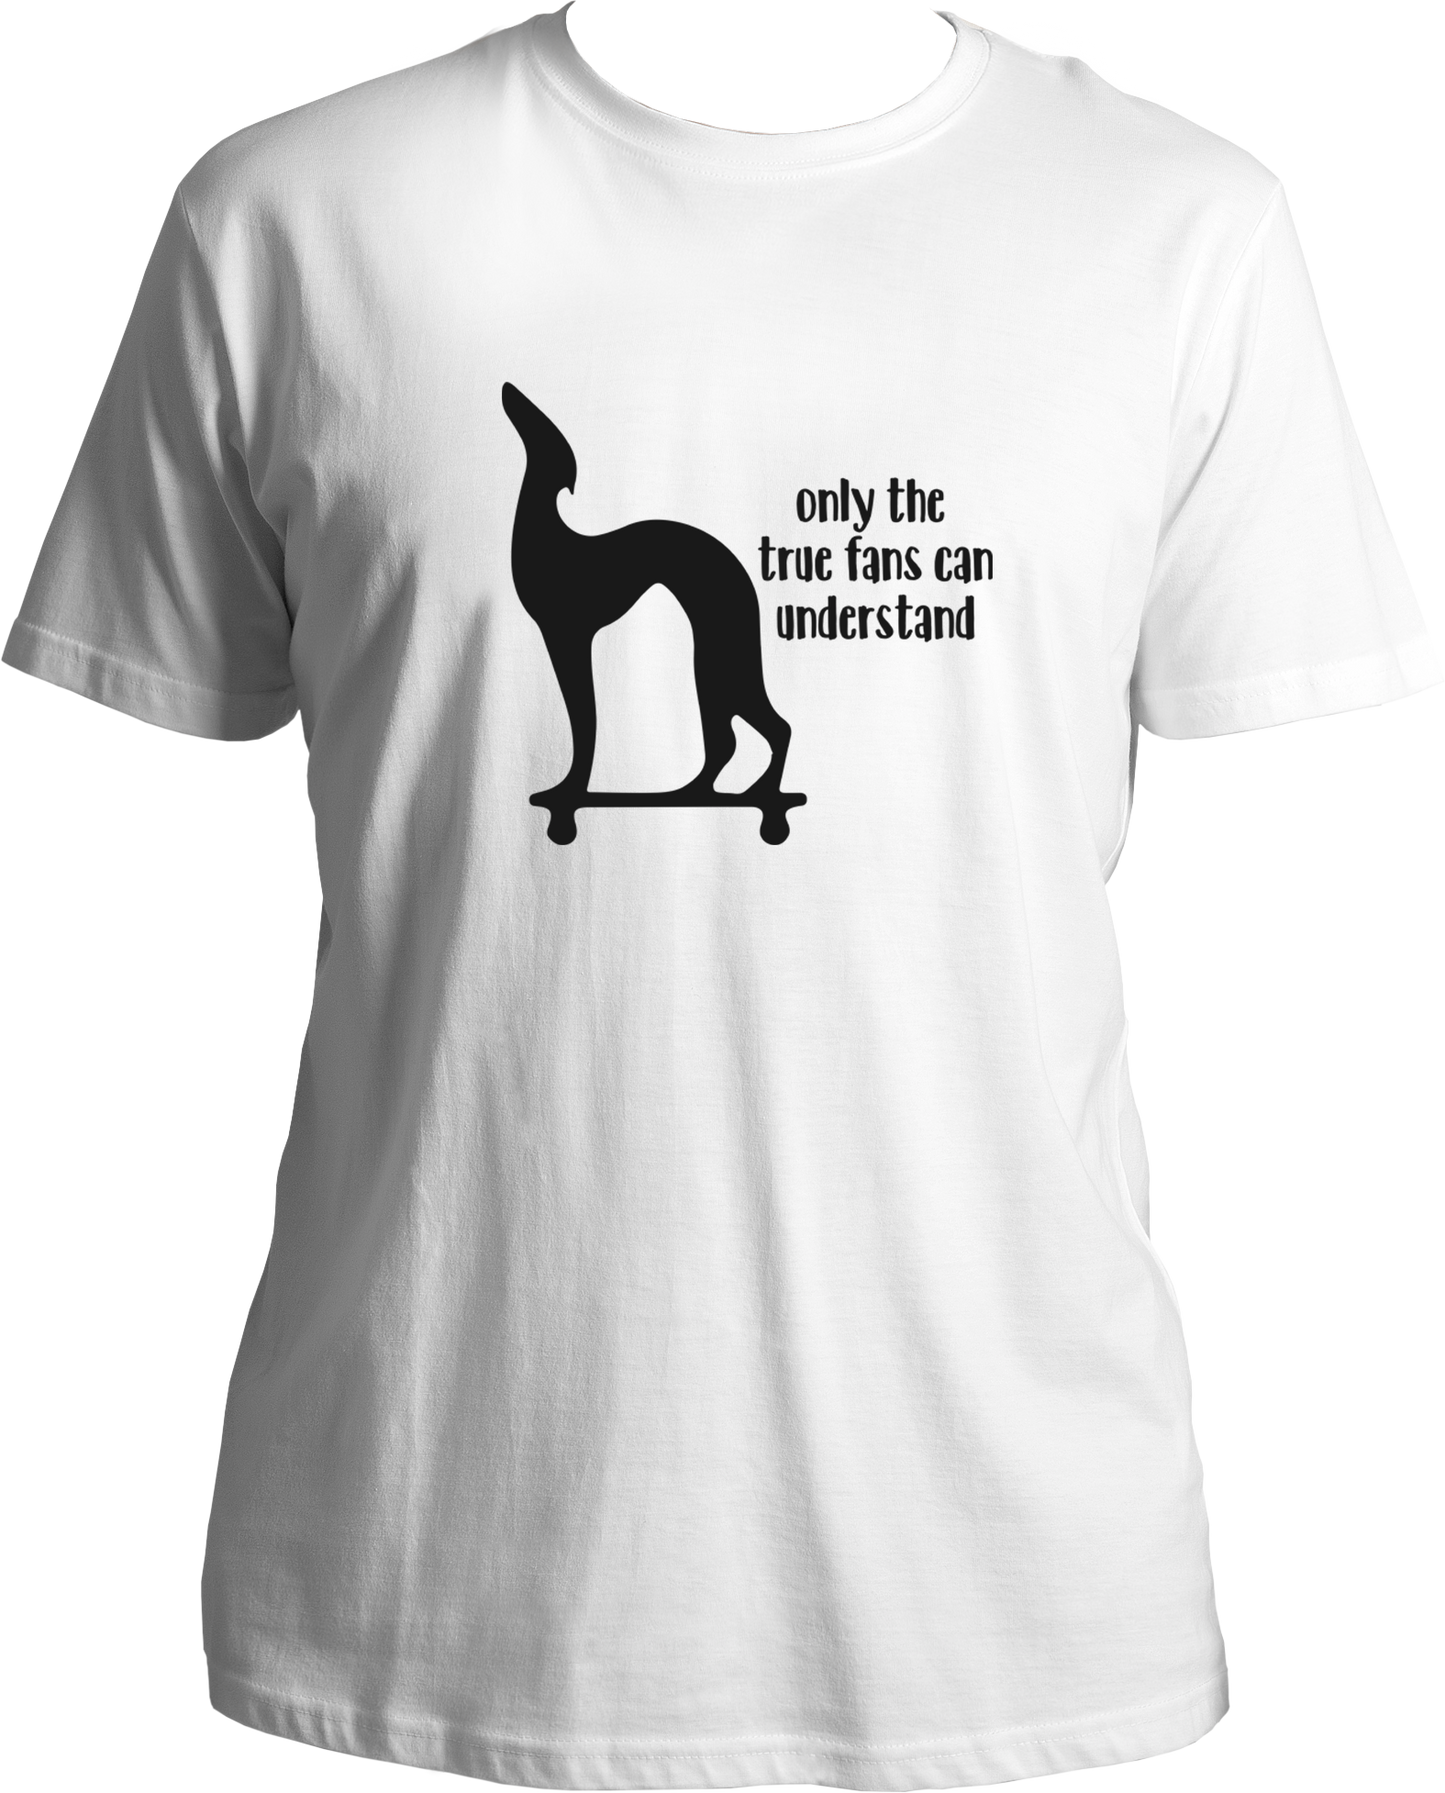 "Unleash your inner F.R.I.E.N.D with our Pat The Dog T-Shirts! Pay homage to the iconic Friends episode where Joey gifts Chandler a unique canine statue. Made with soft cotton, this shirt is a must-have for any devoted fan. Don't miss out on the laughs and get yours today! 🛋️👕 #TrueFanFashion"